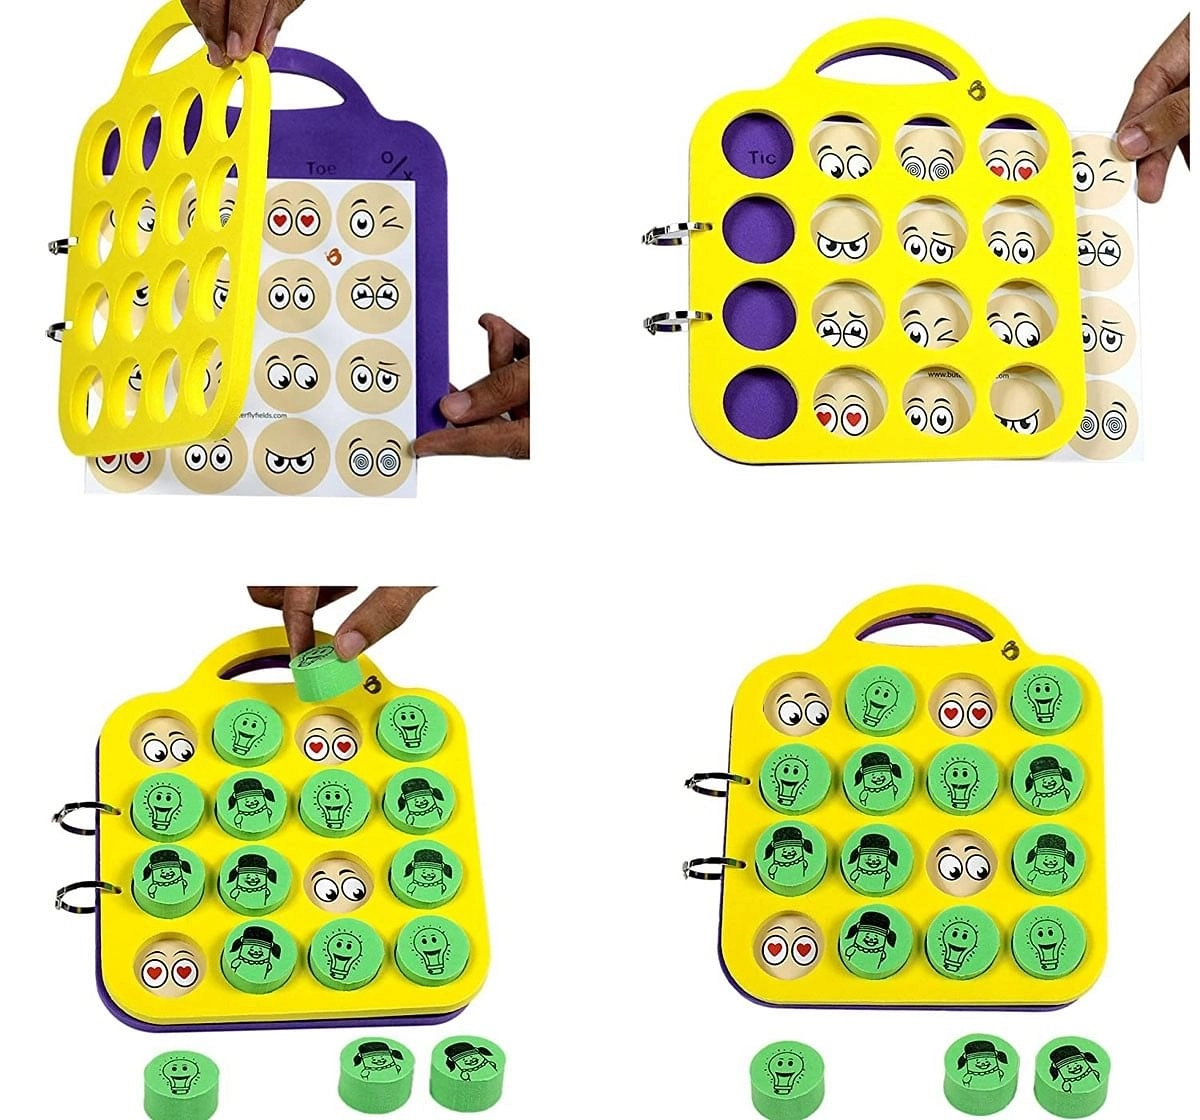 Butterfly Edufields Memory Skills Matching Game Multicolour 3Y+